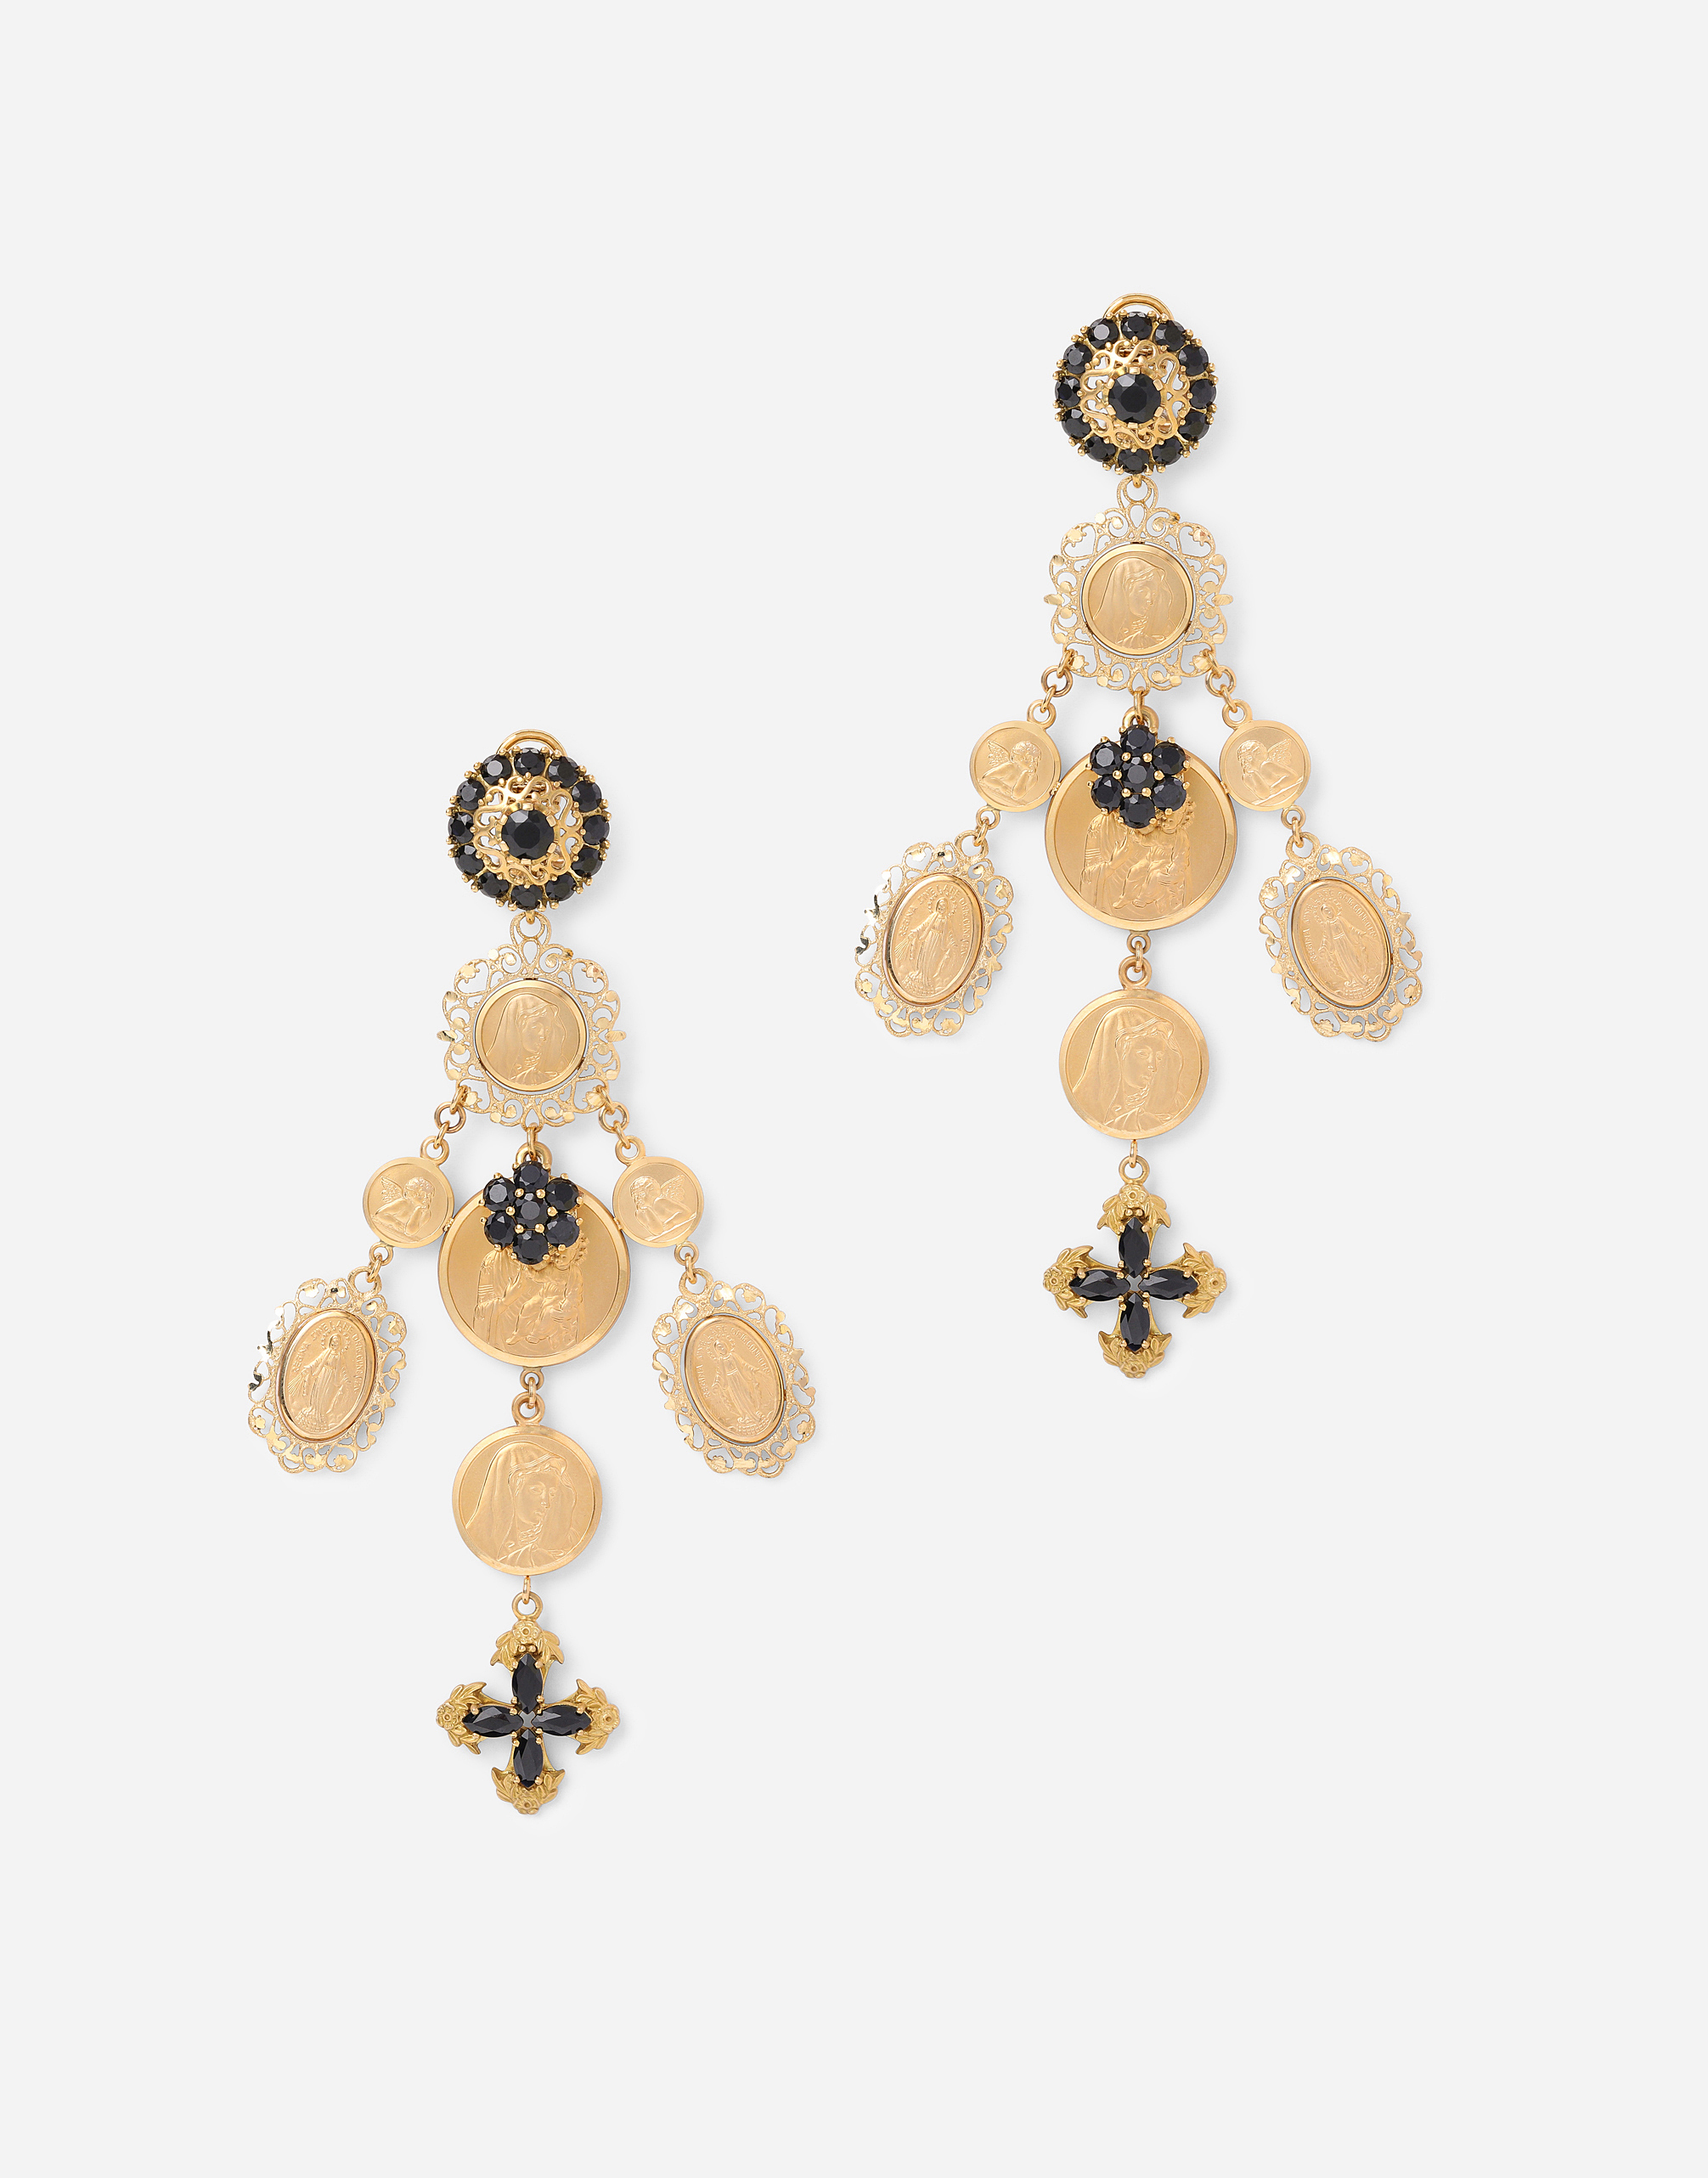 Dolce & Gabbana Sicily Earrings In Yellow 18kt Gold With Medals